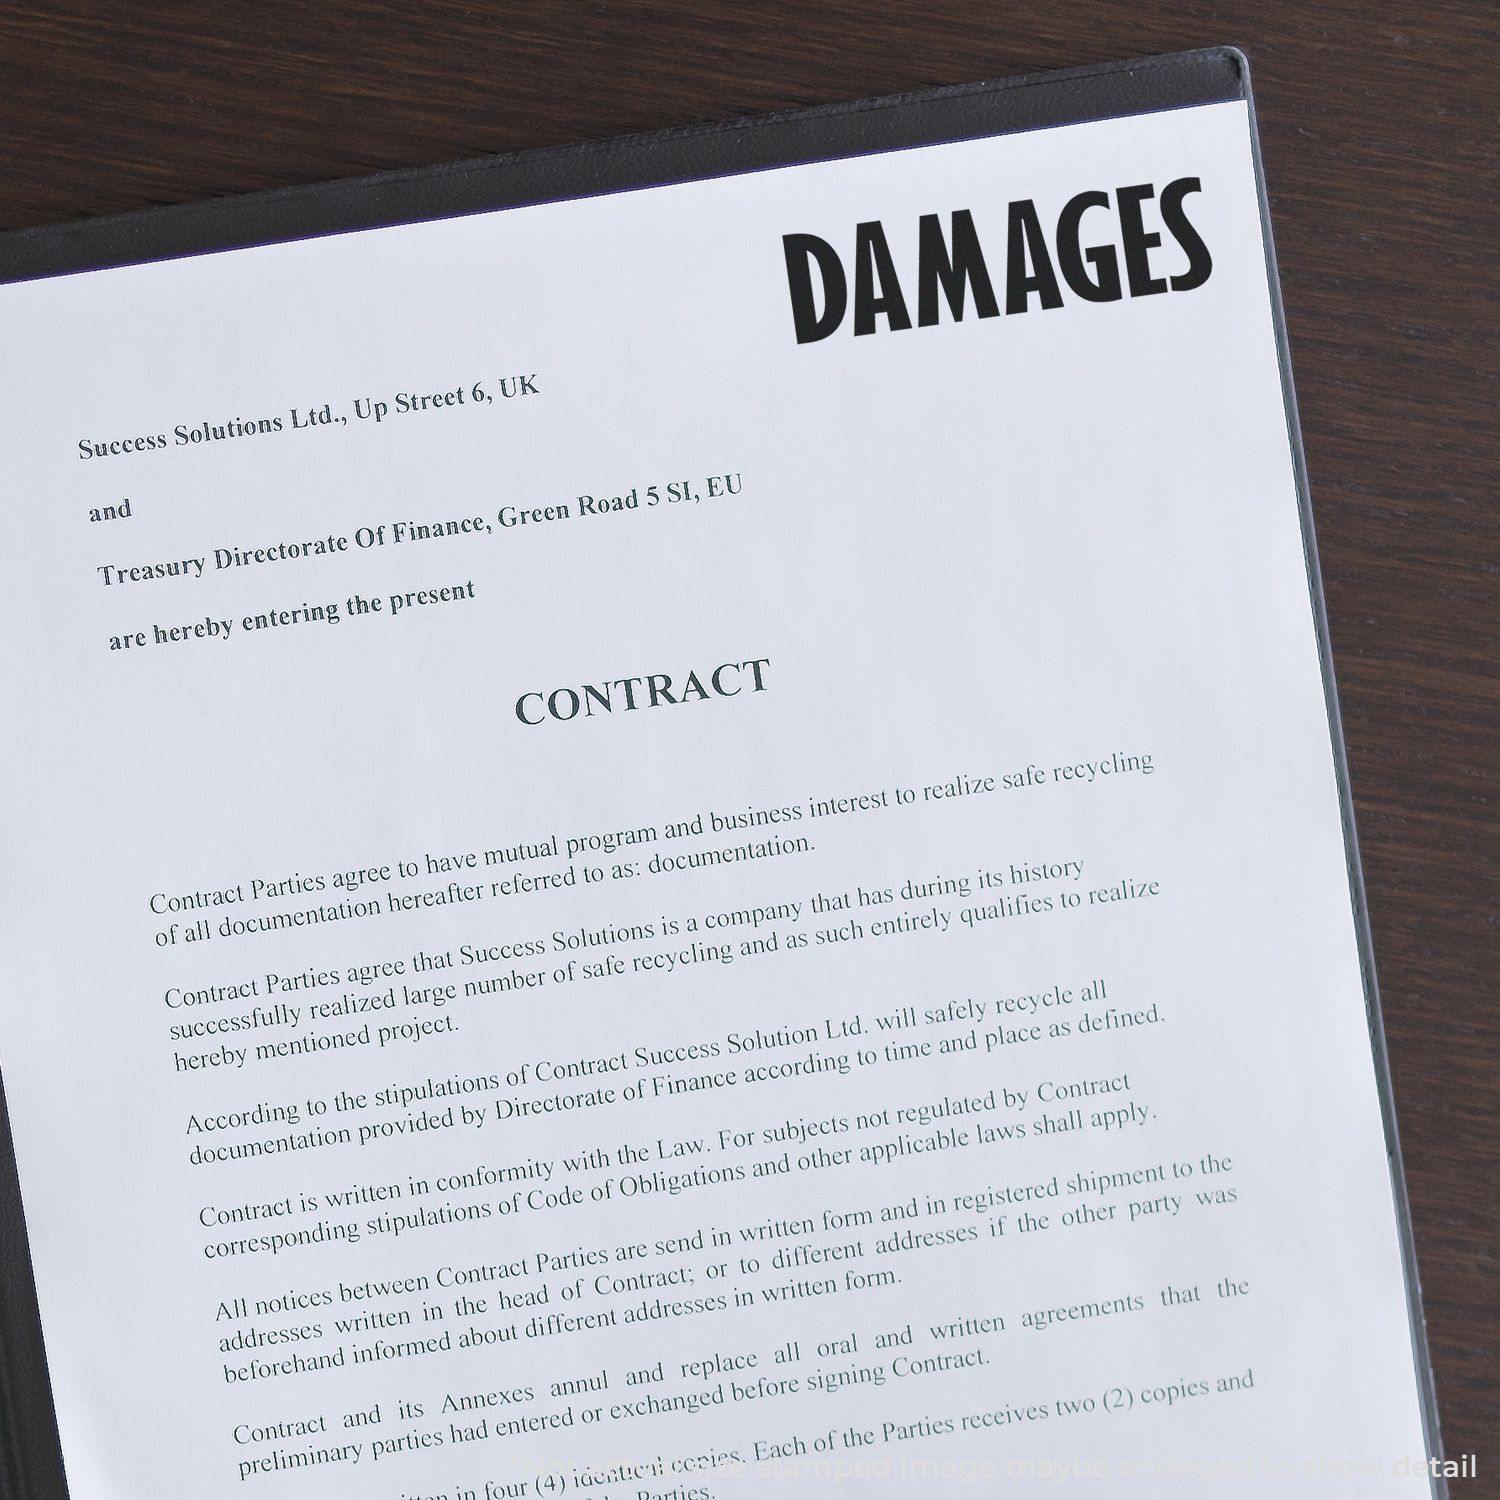 A stock office rubber stamp with a stamped image showing how the text "DAMAGES" is displayed after stamping.